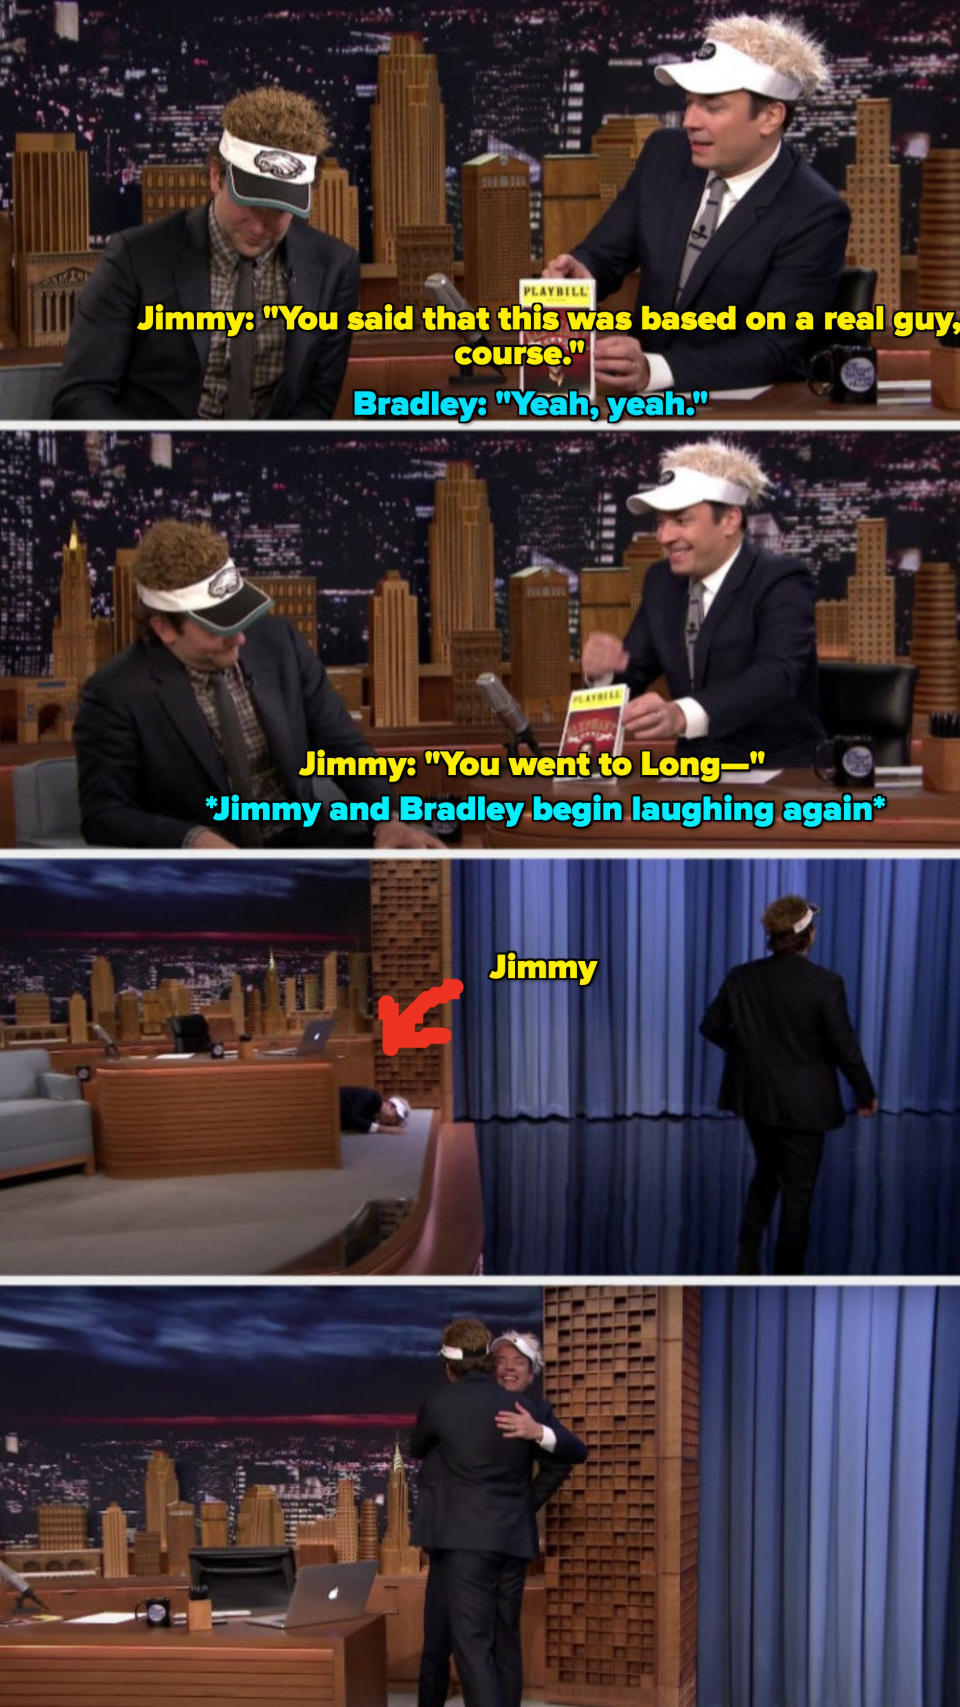 Jimmy Fallon and Bradley Cooper laugh then hug during an interview on "The Tonight Show"